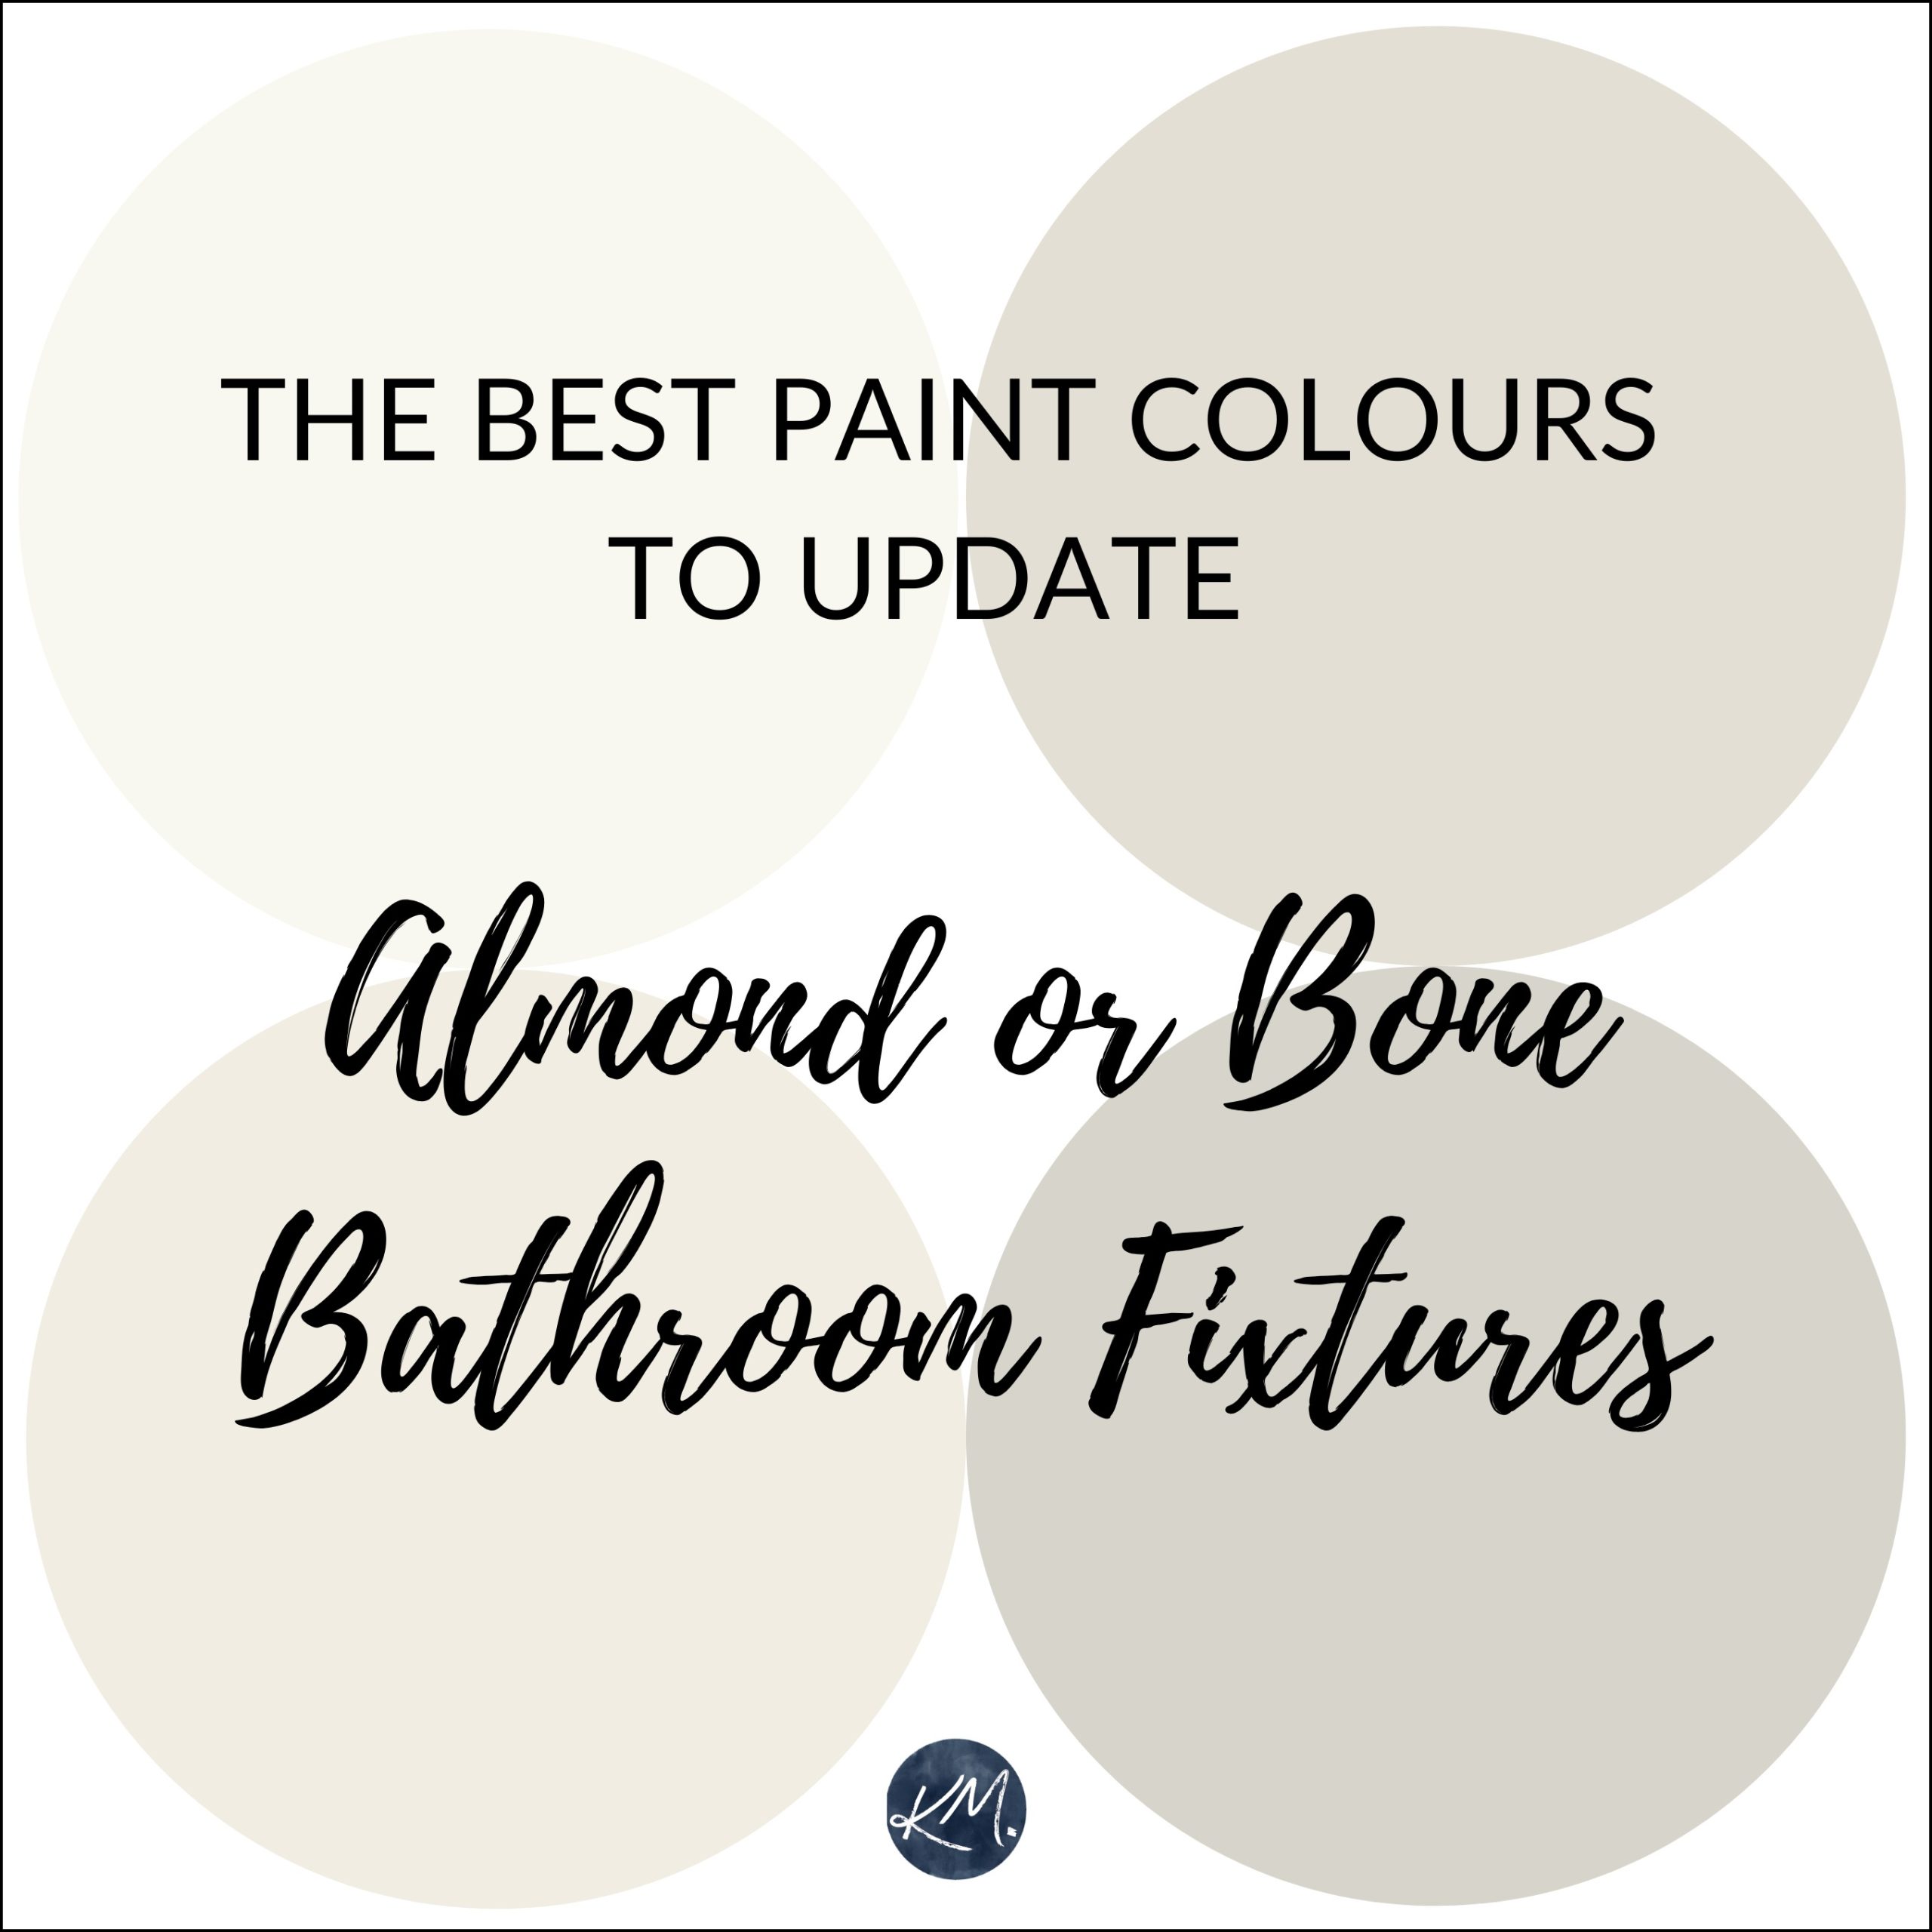 The best paint colours to update bone, almond bathroom fixtures. Kylie M Interiors Edesign, diy decorating and update ideas blog and advice